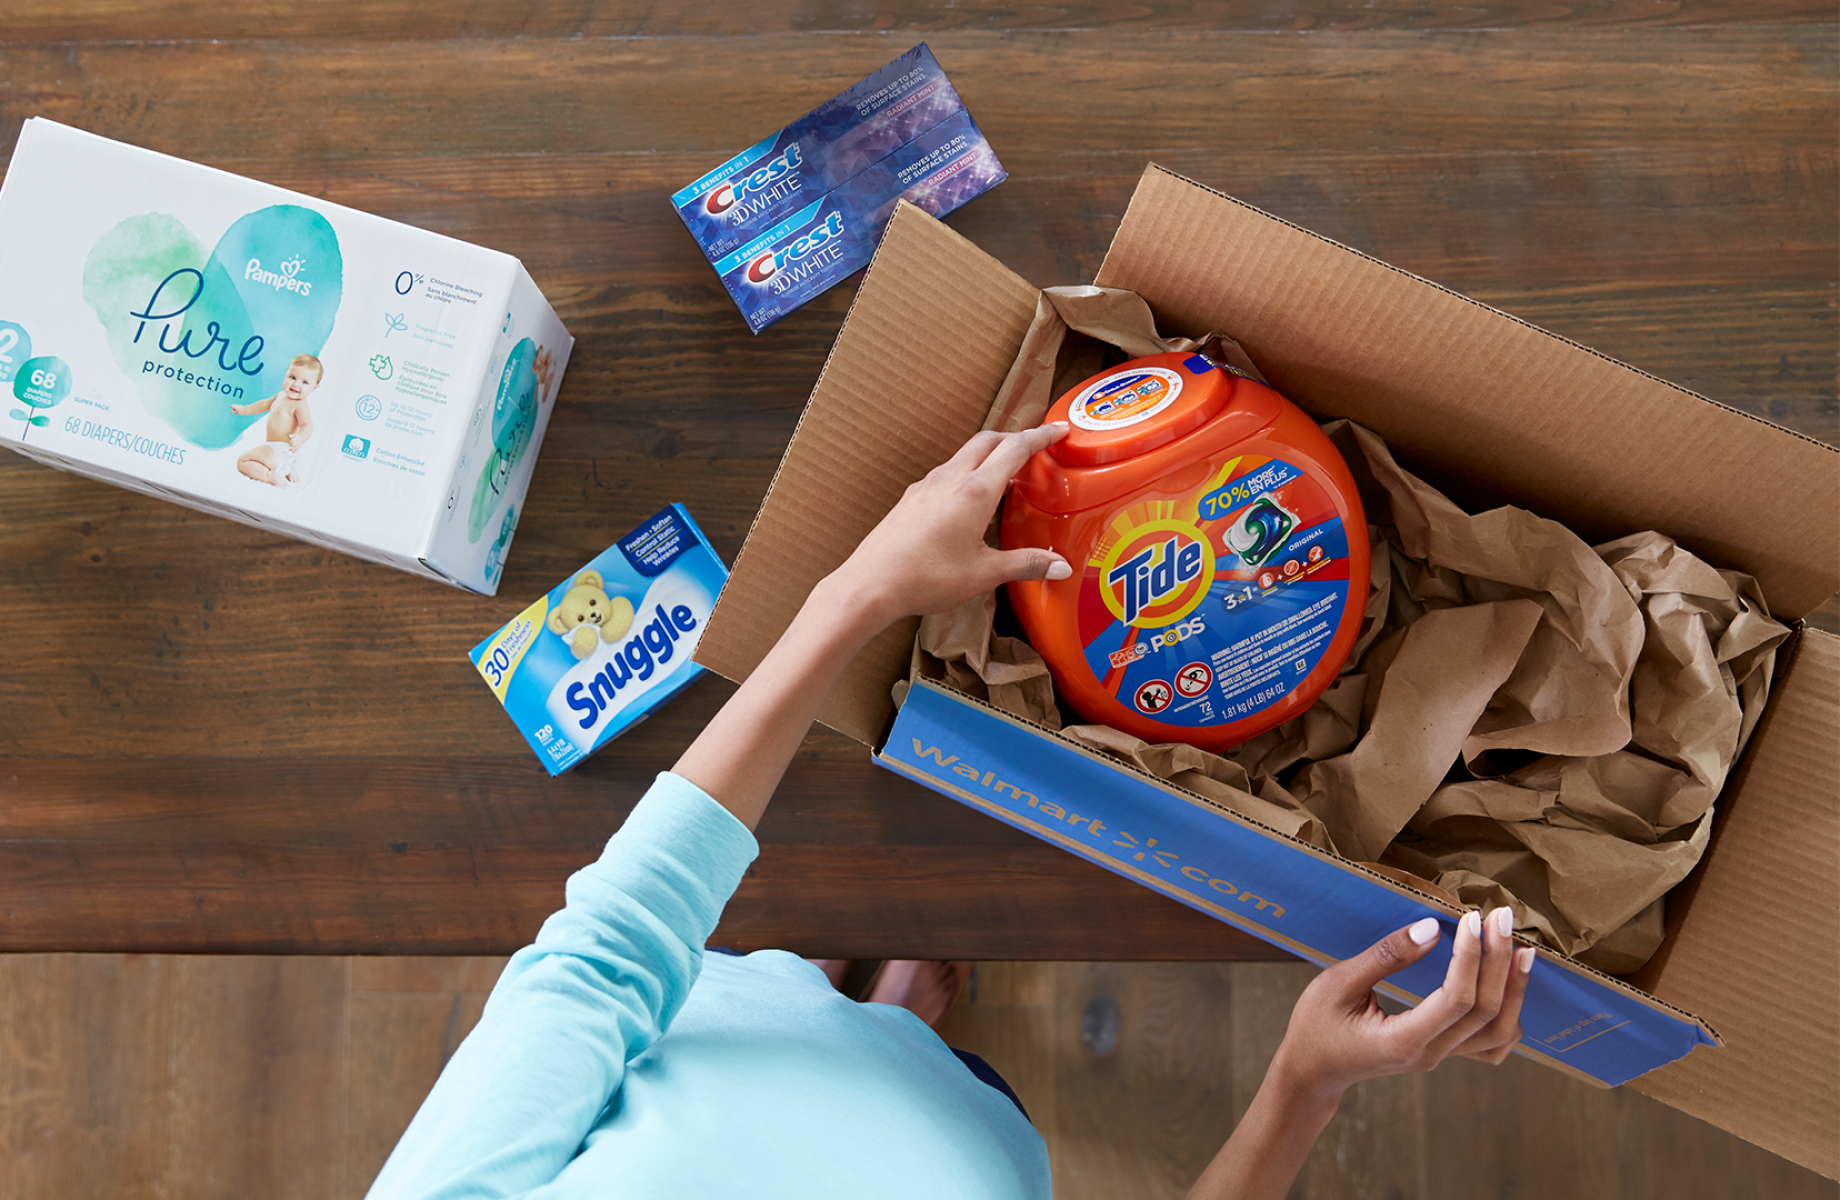 A Walmart customer opens a delivery box filled with laundry detergent, dryer sheets, and more household goods